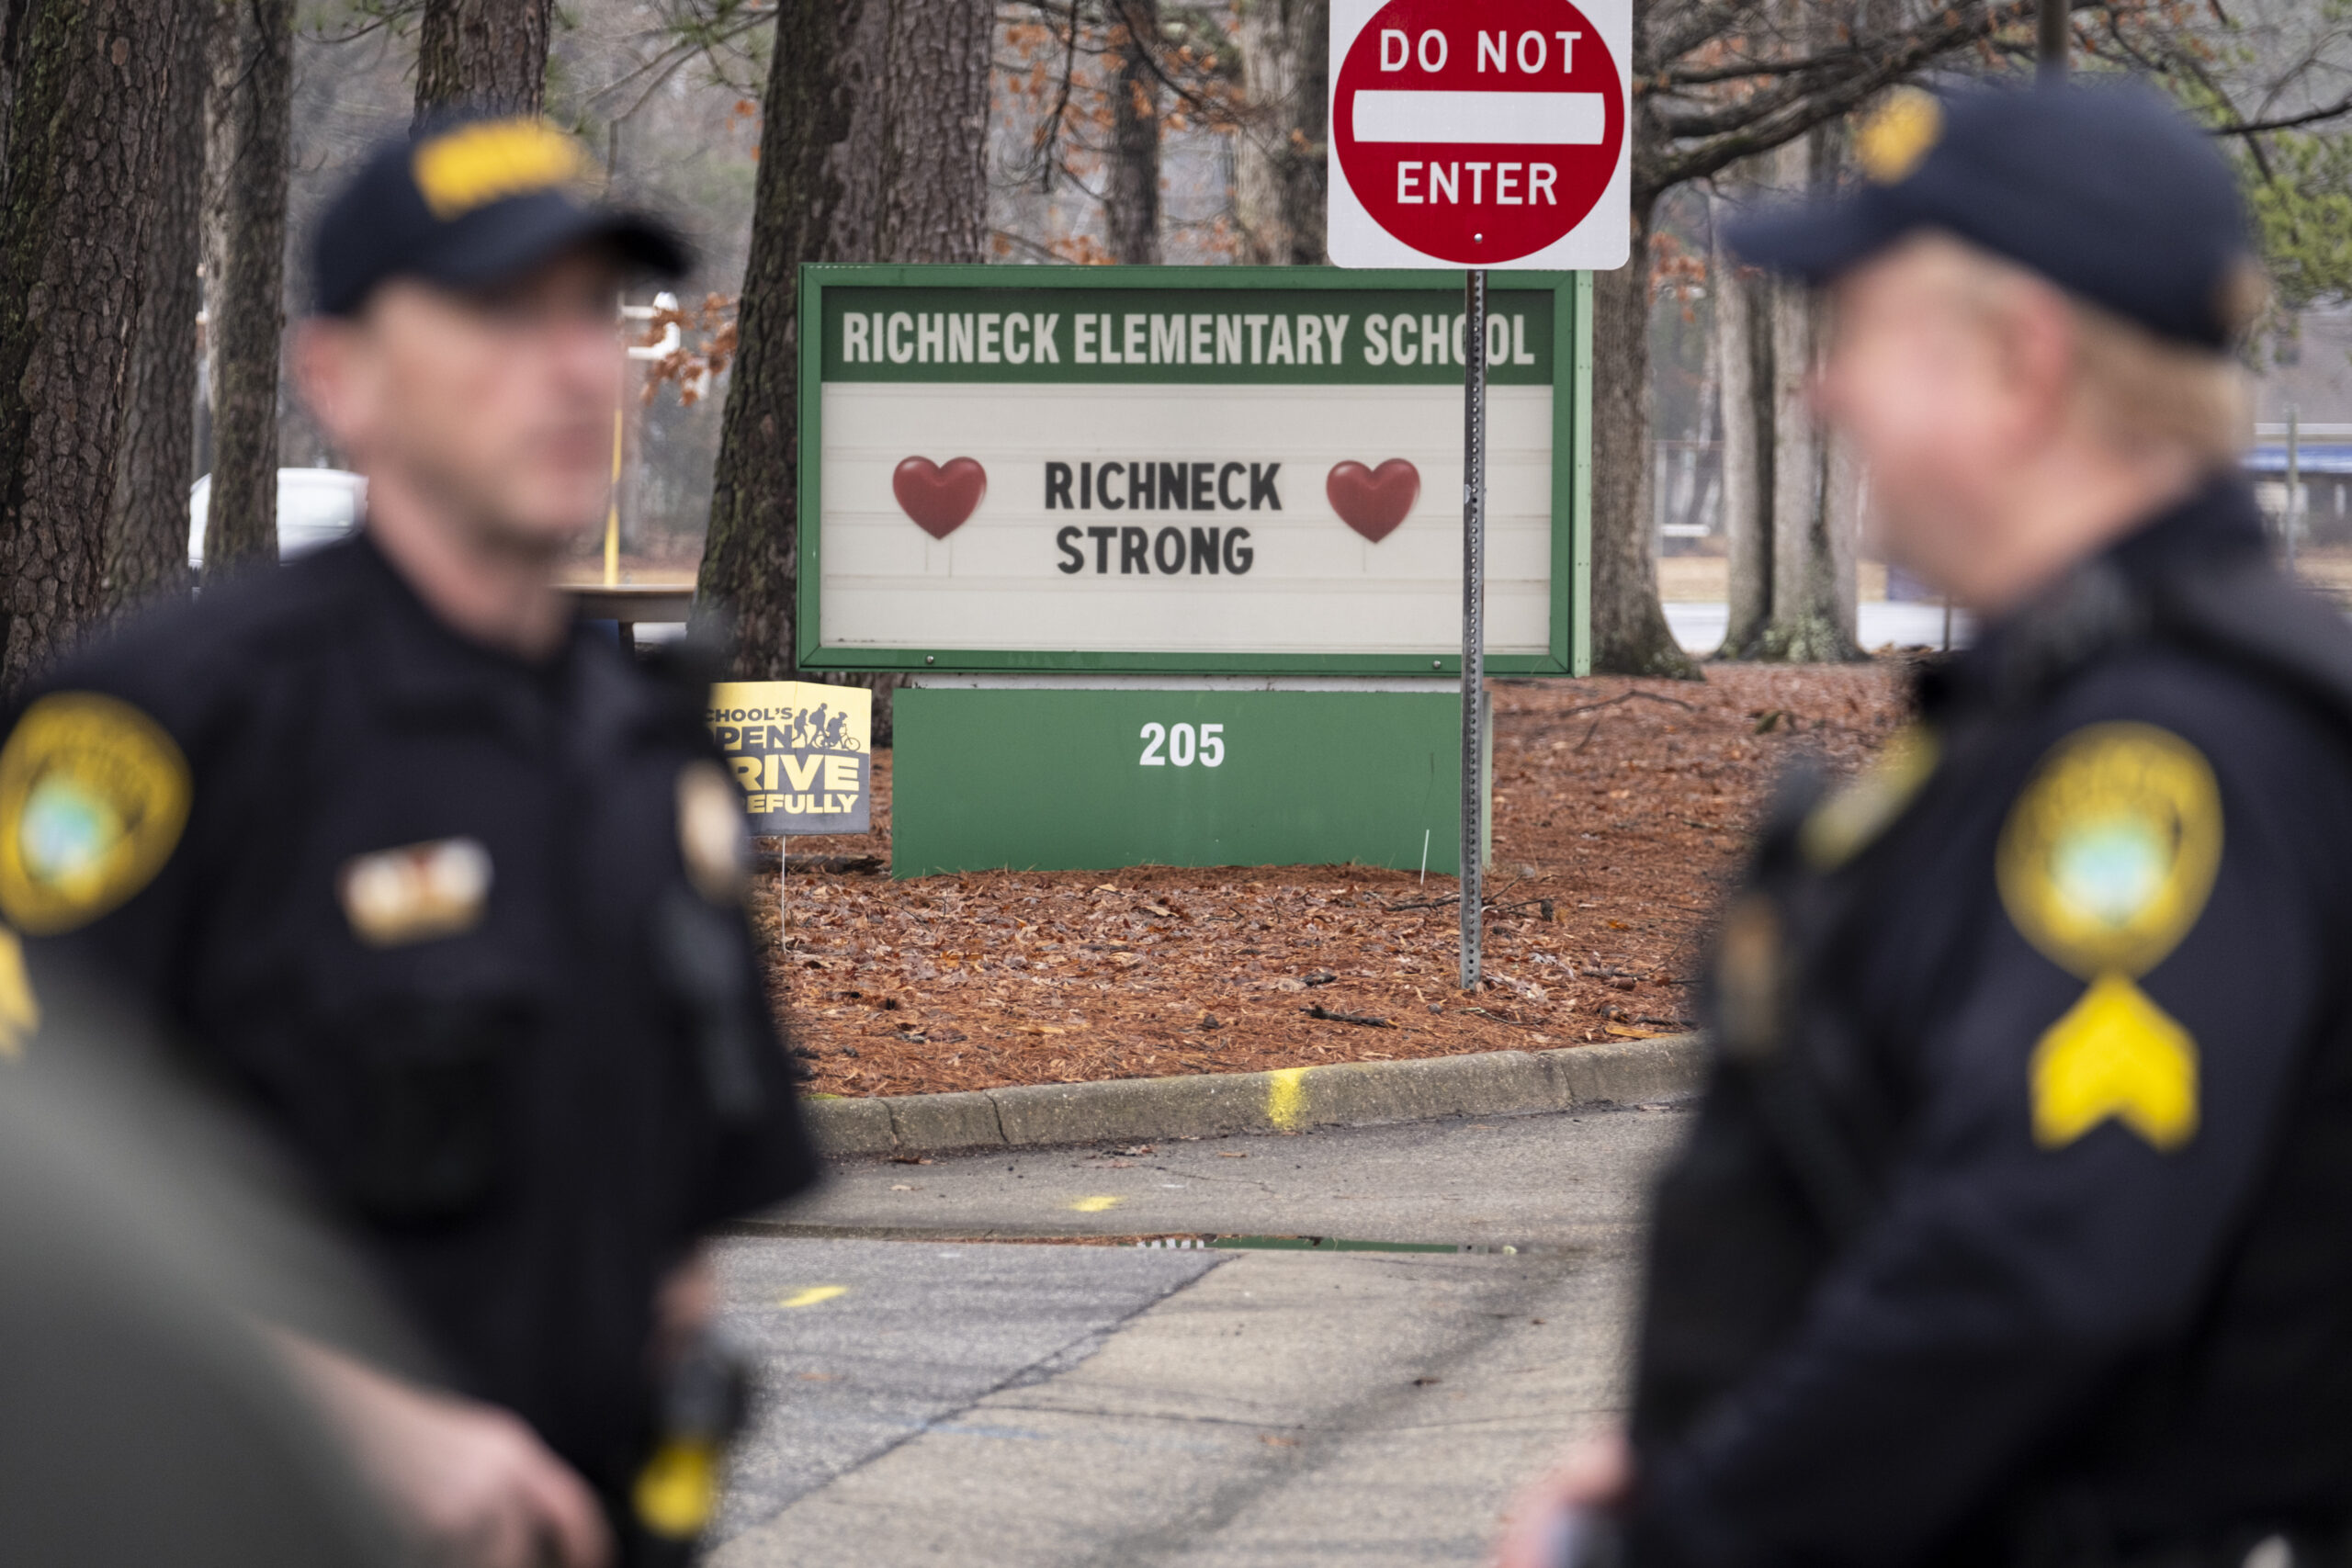 Police look on as students return to Richneck Elementary on Jan. 30, 2023, in Newport News, Va. A g...